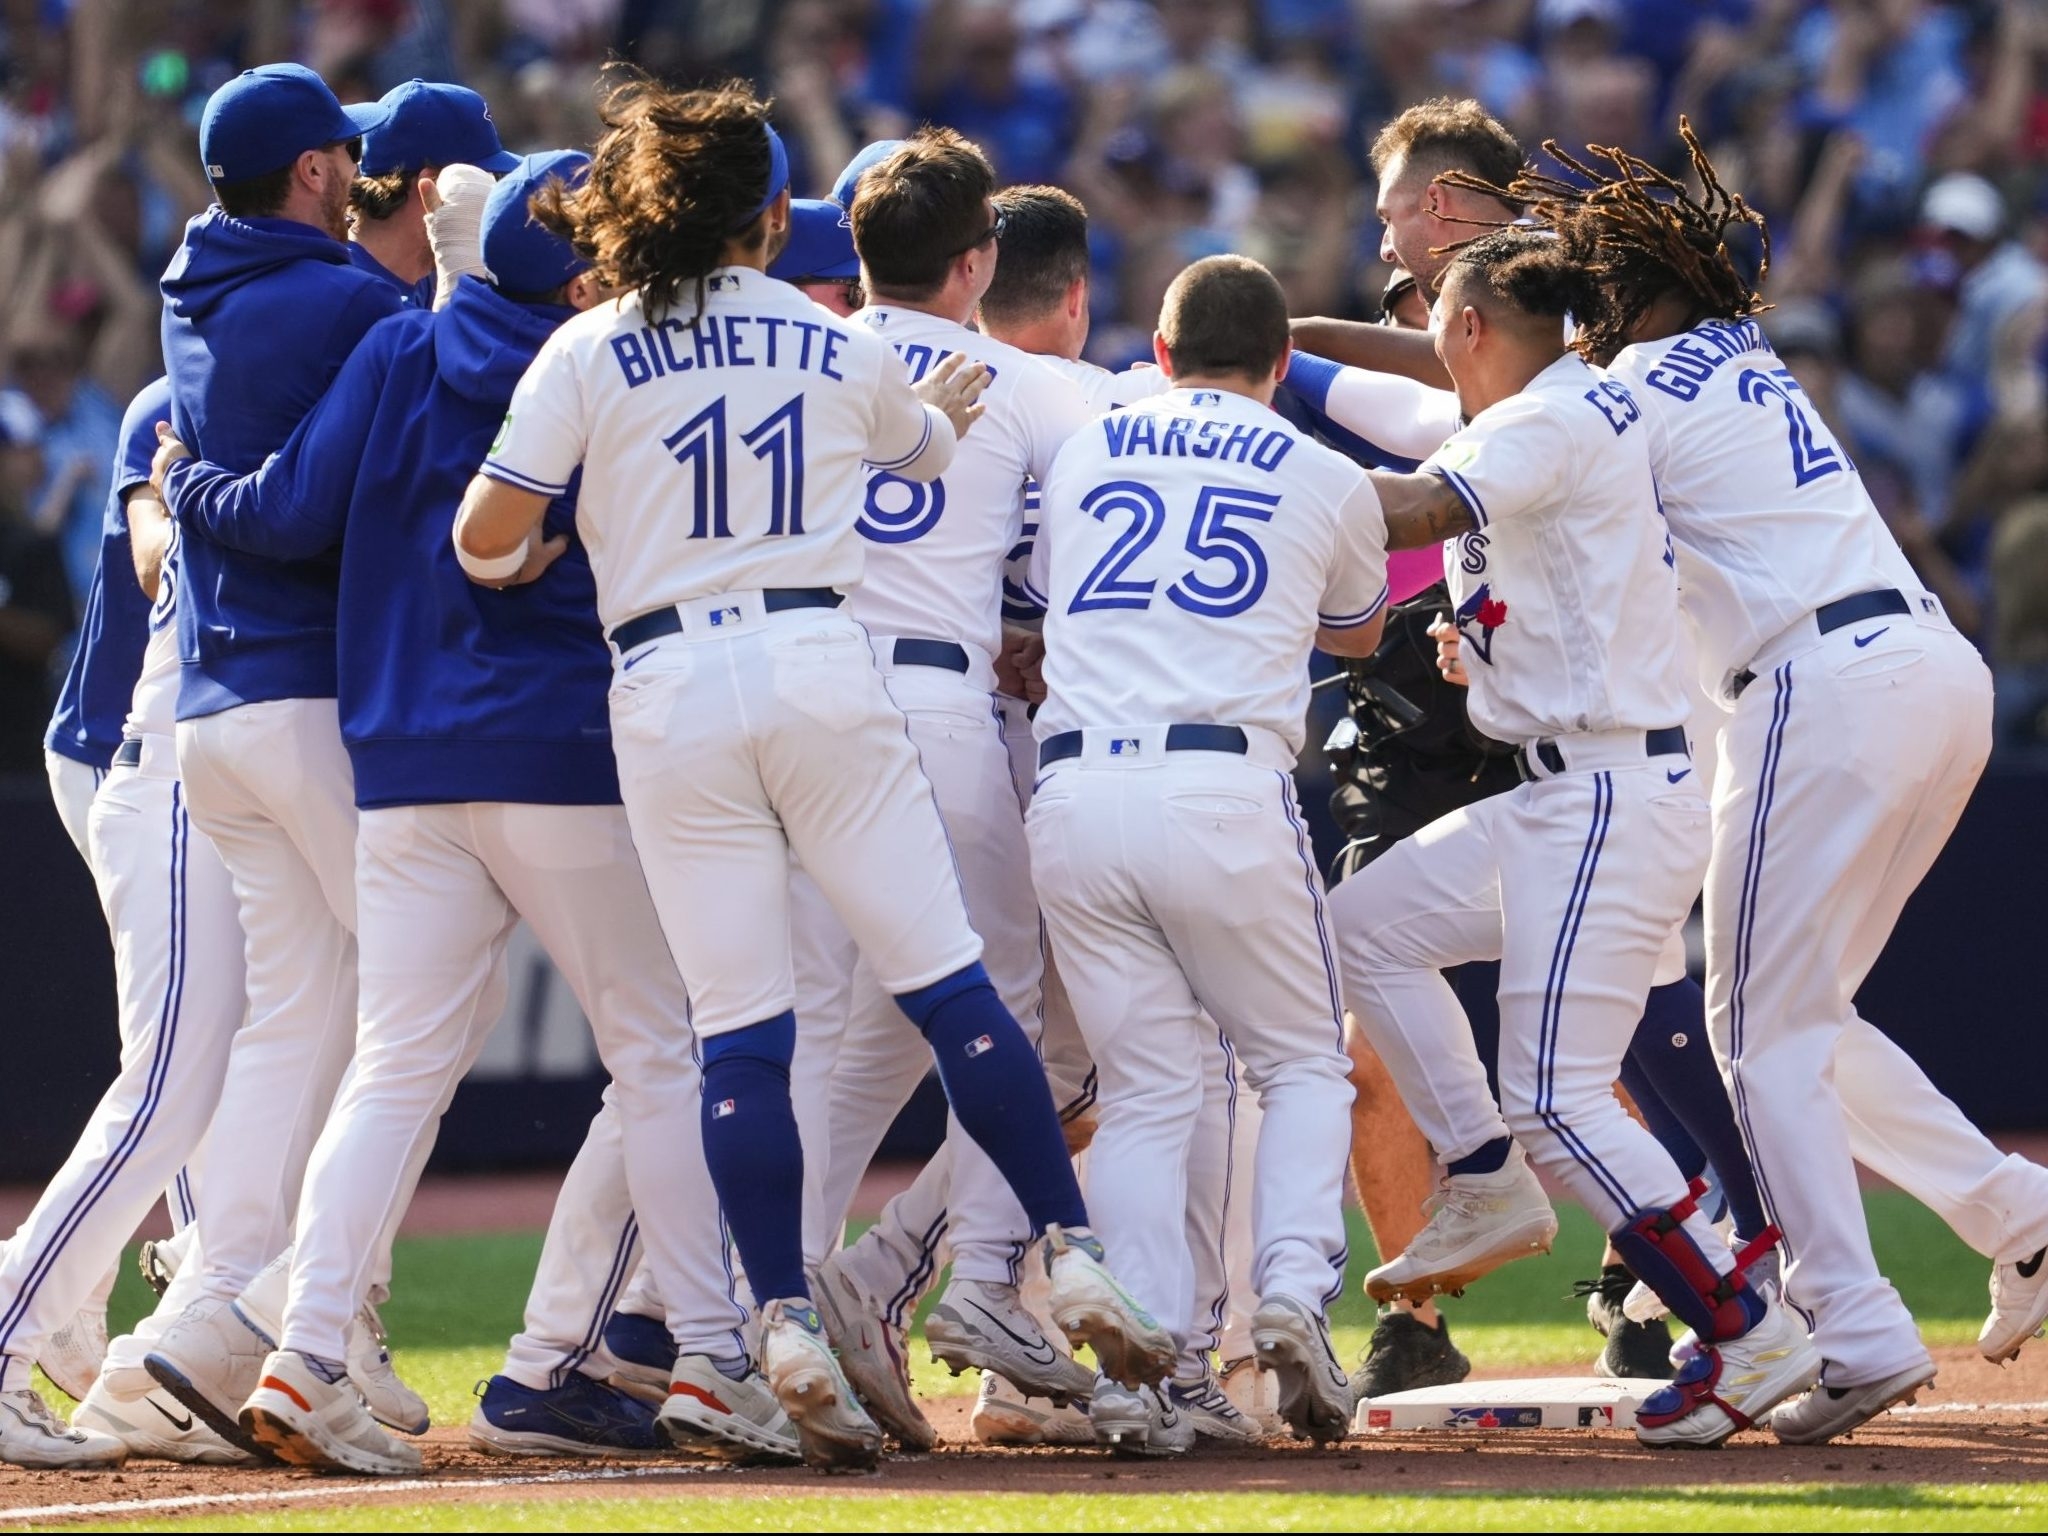 MLB.com has the Toronto Blue Jays making the World Series in 2023